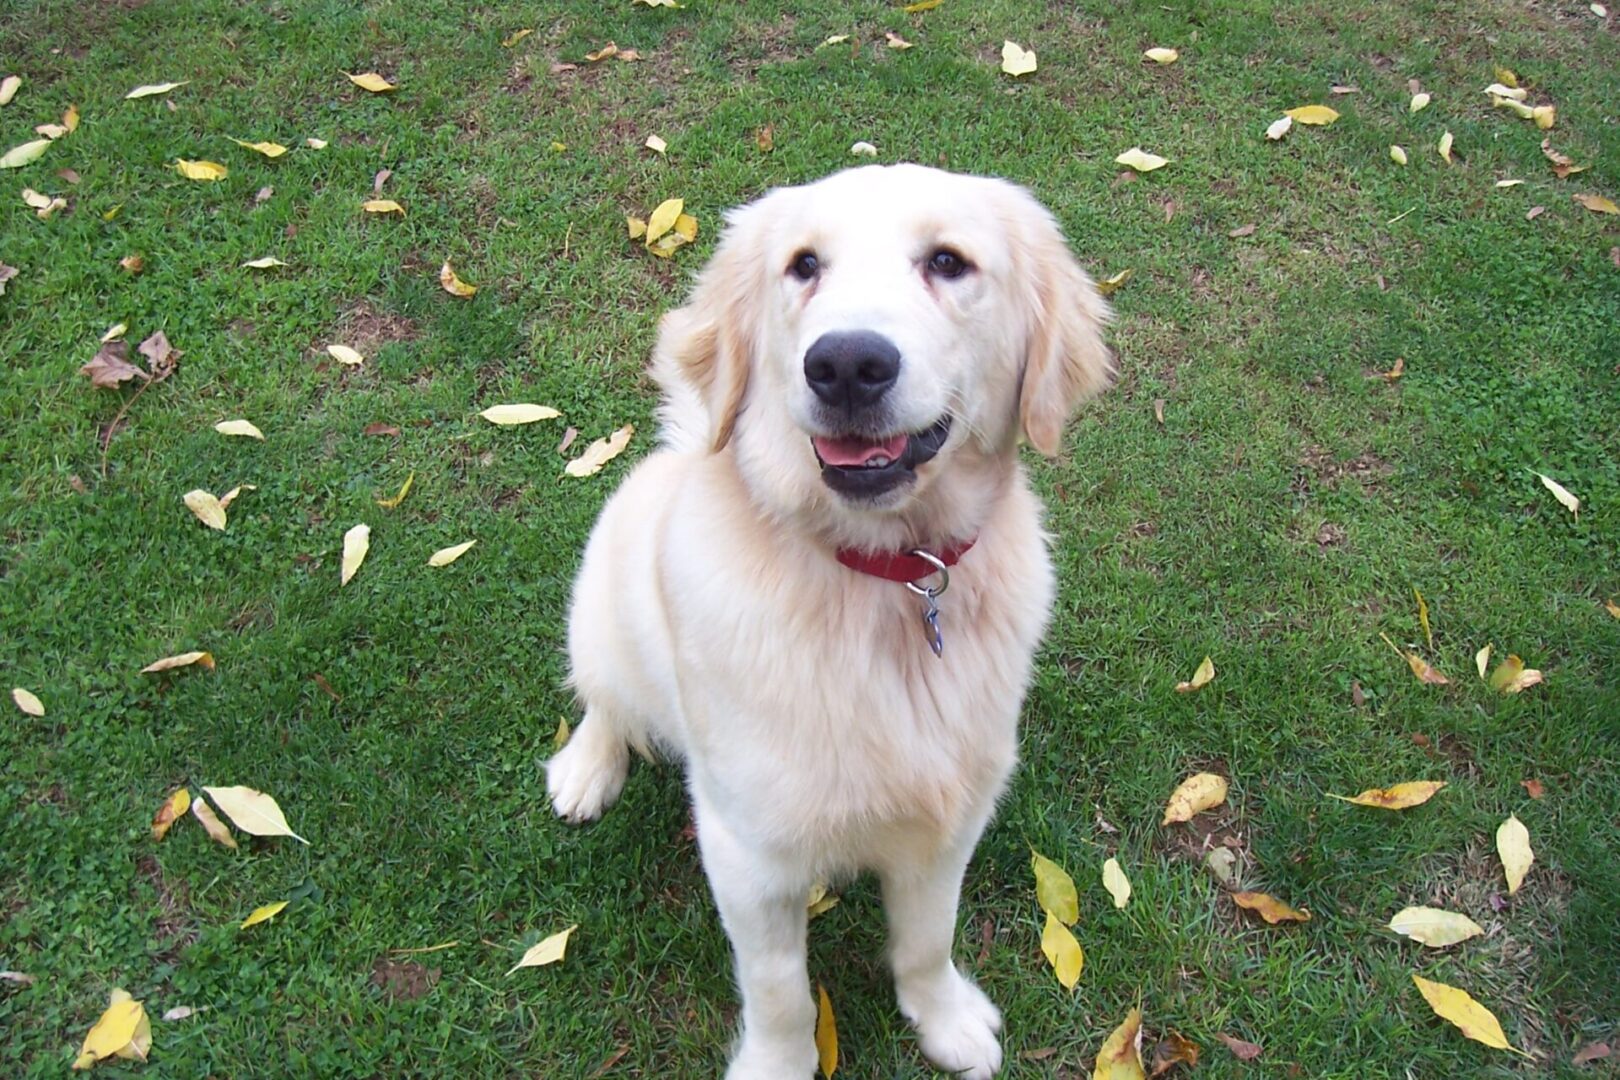 A happy golden retriever sitting on grass sprinkled with yellow leaves.